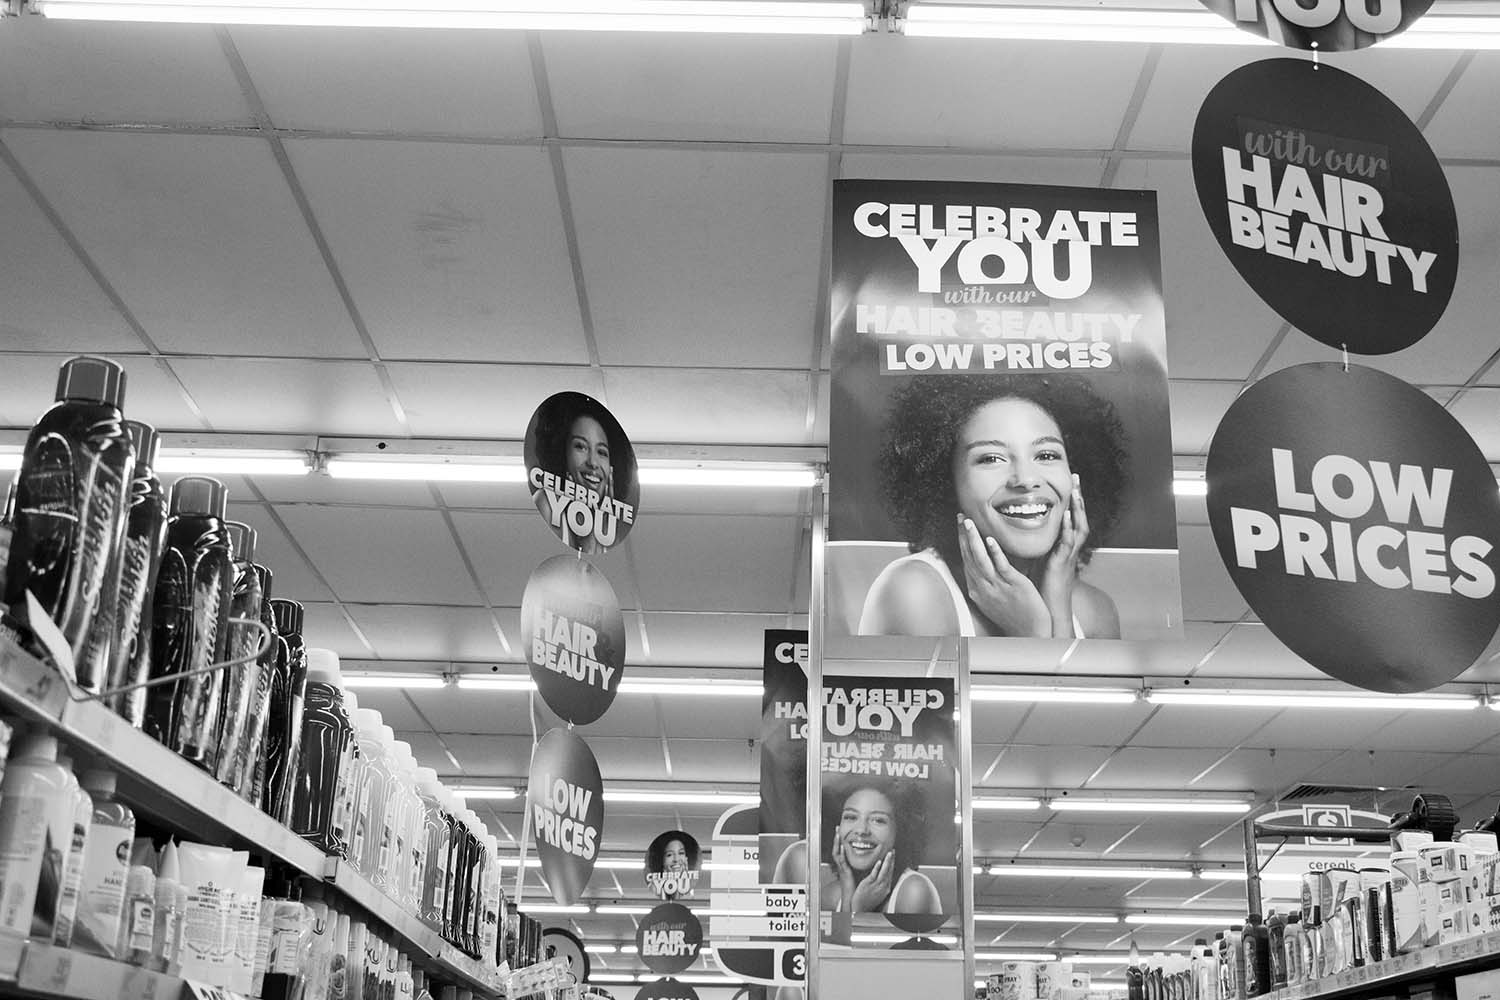 bw image from seeking solace in a grocery store